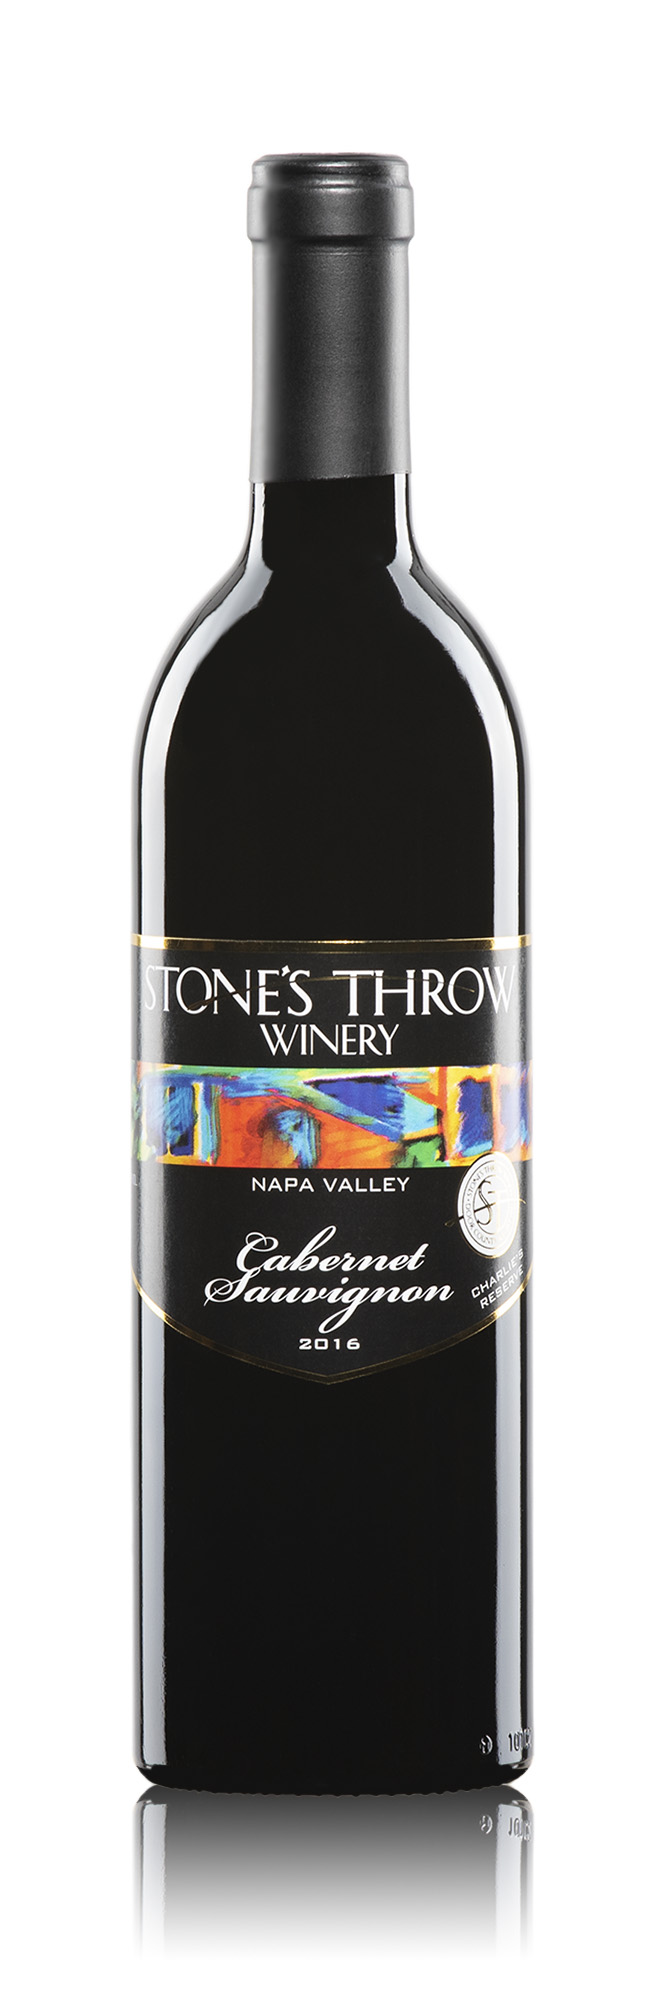 Product Image for Cabernet Sauvignon, St. Helena, Napa Valley, Charlie's Reserve 2018